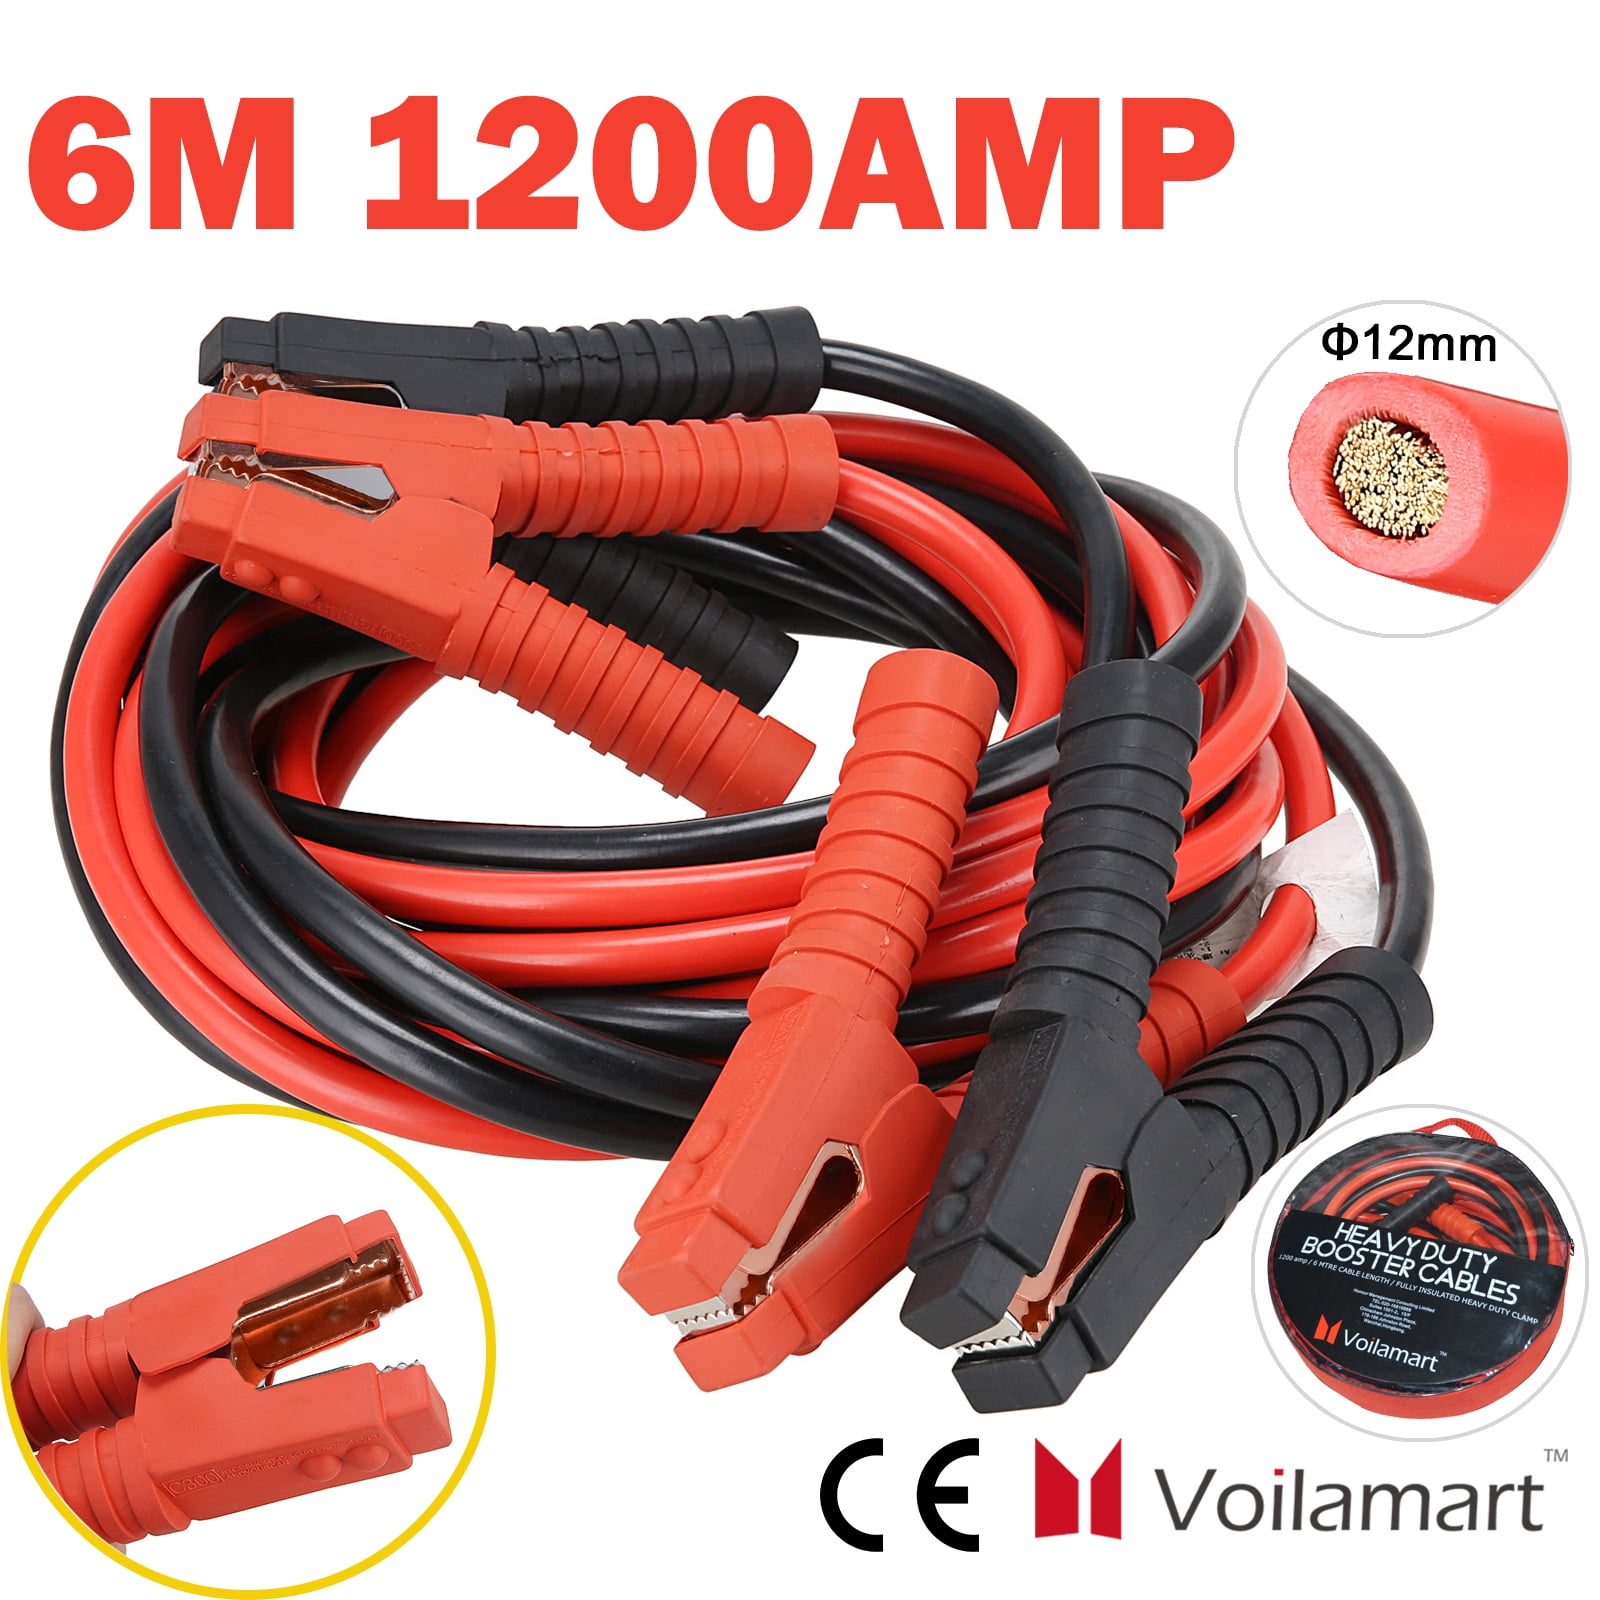 Jumper Cables With Case Bag 4 Gauge 20ft Cars Trucks SUV Motorcycles Booster New 